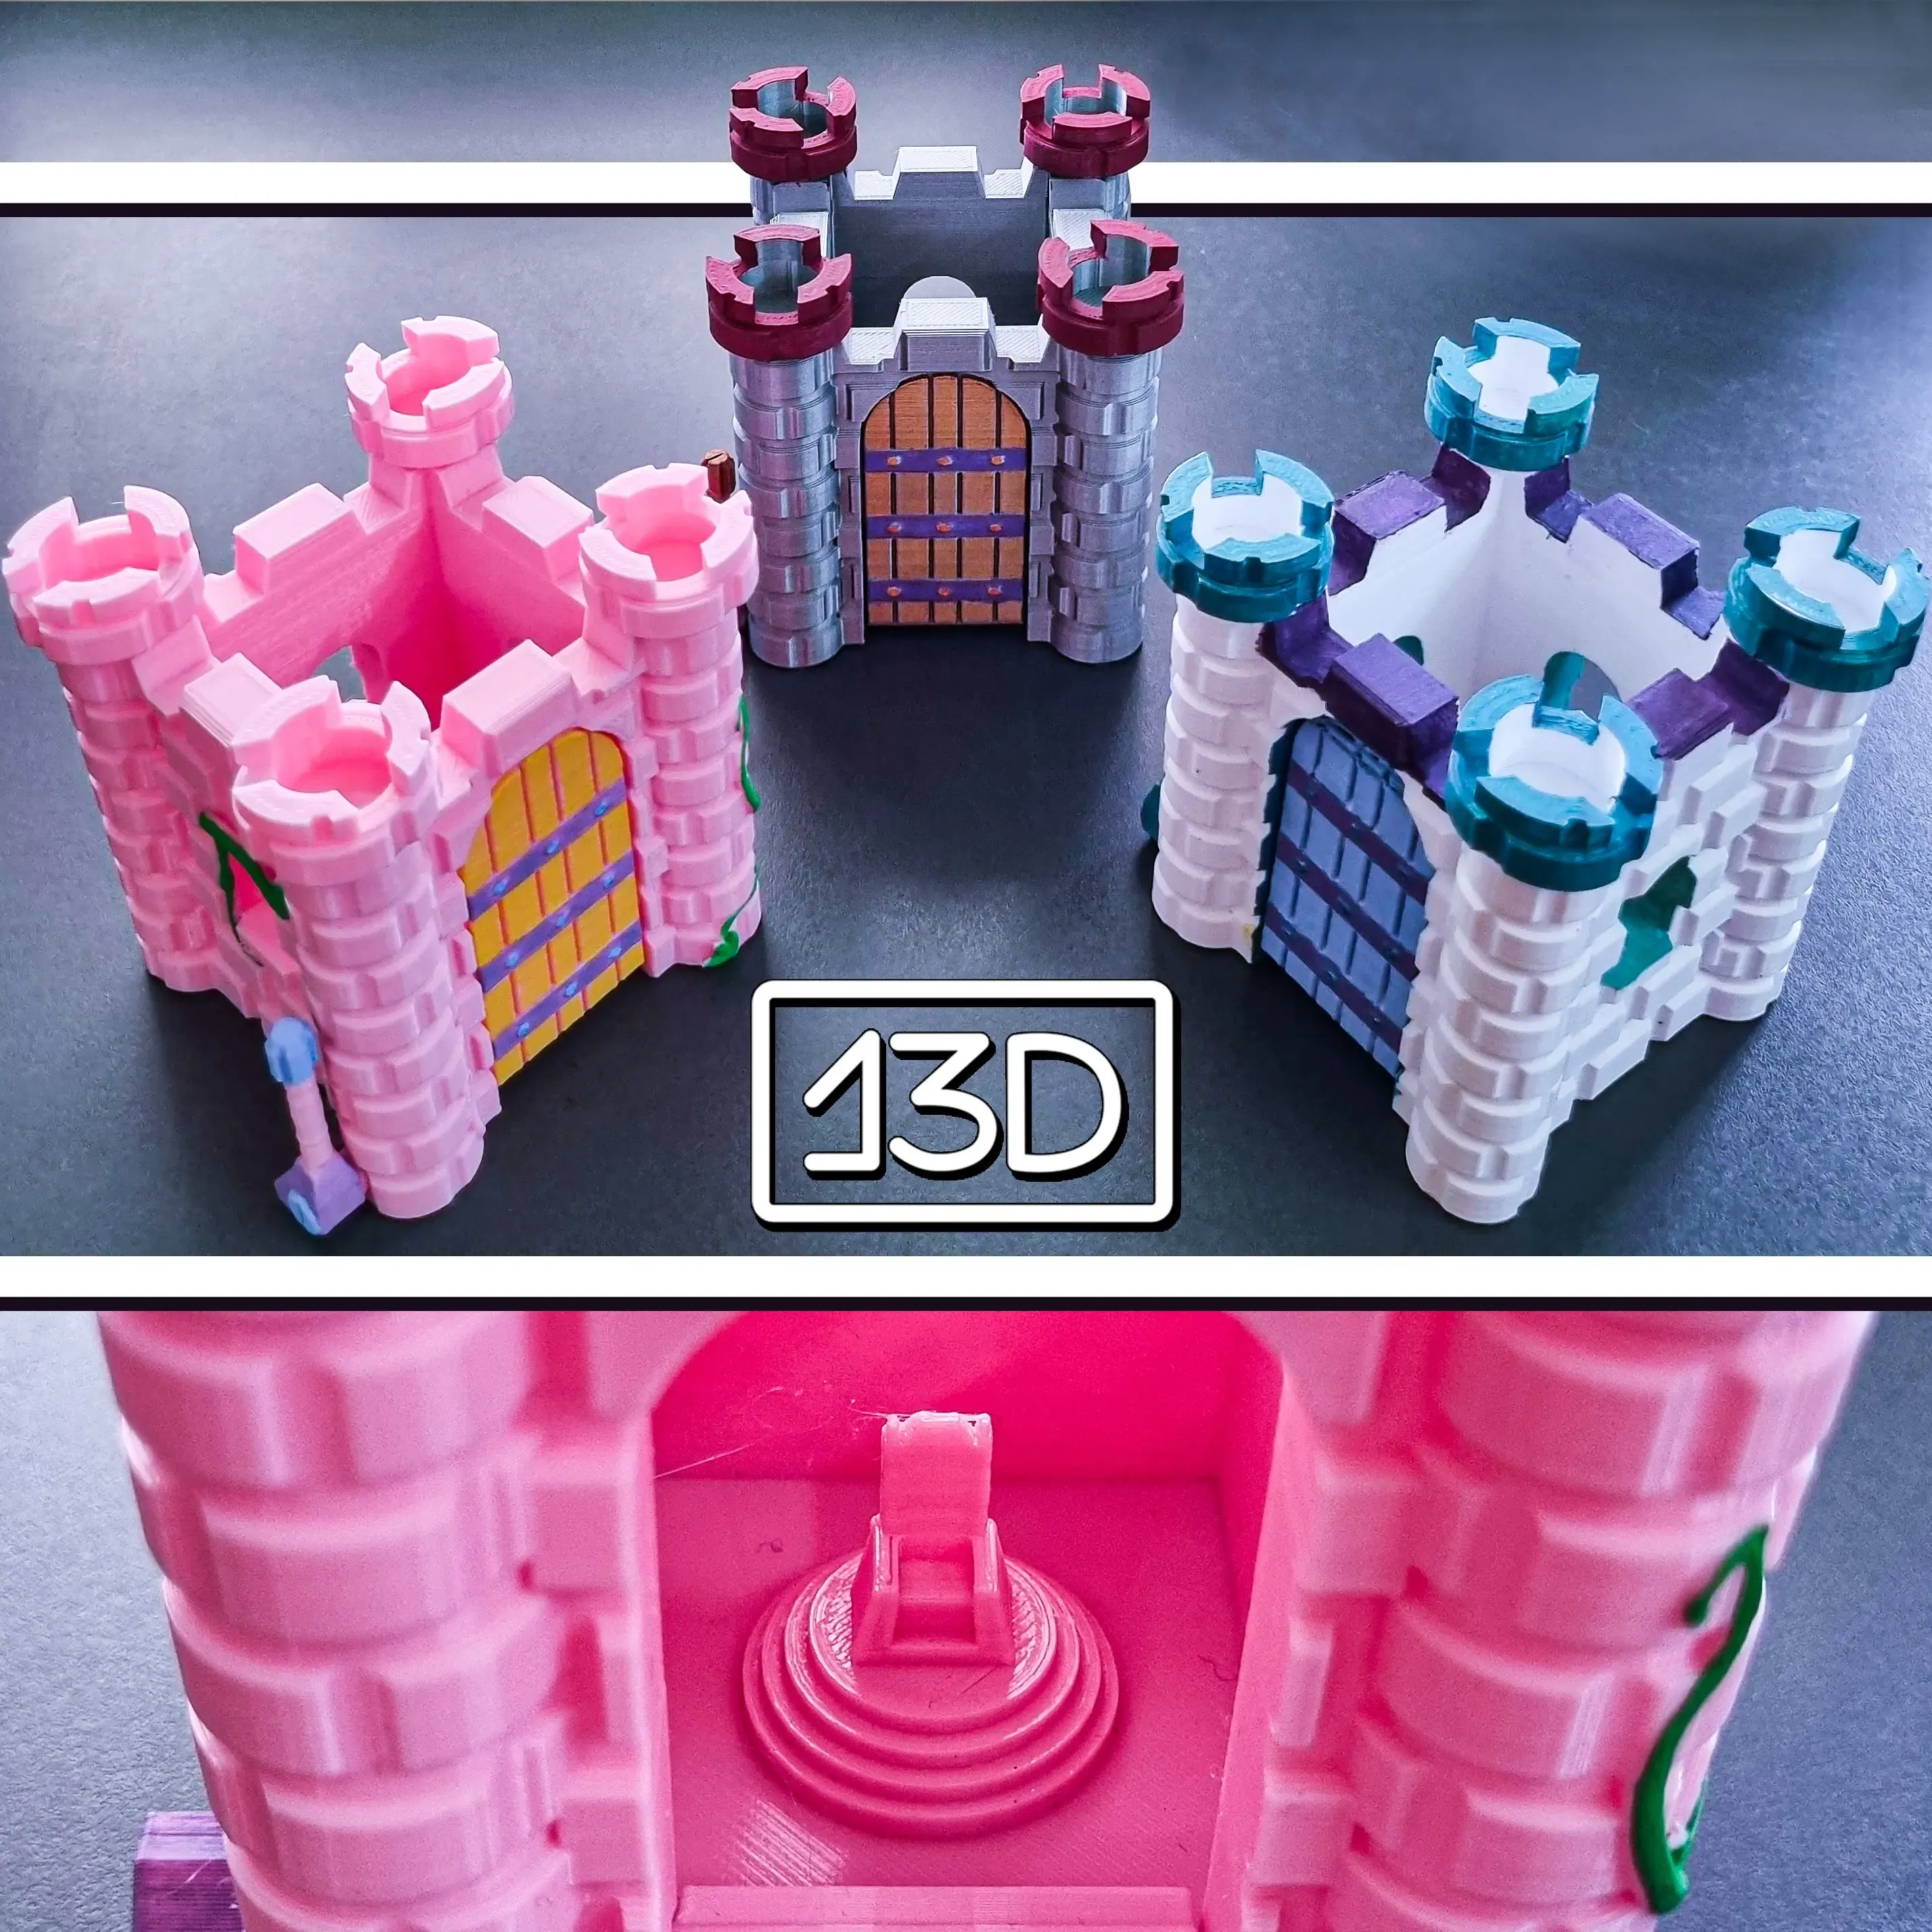 Toy Castle and Phone Holder